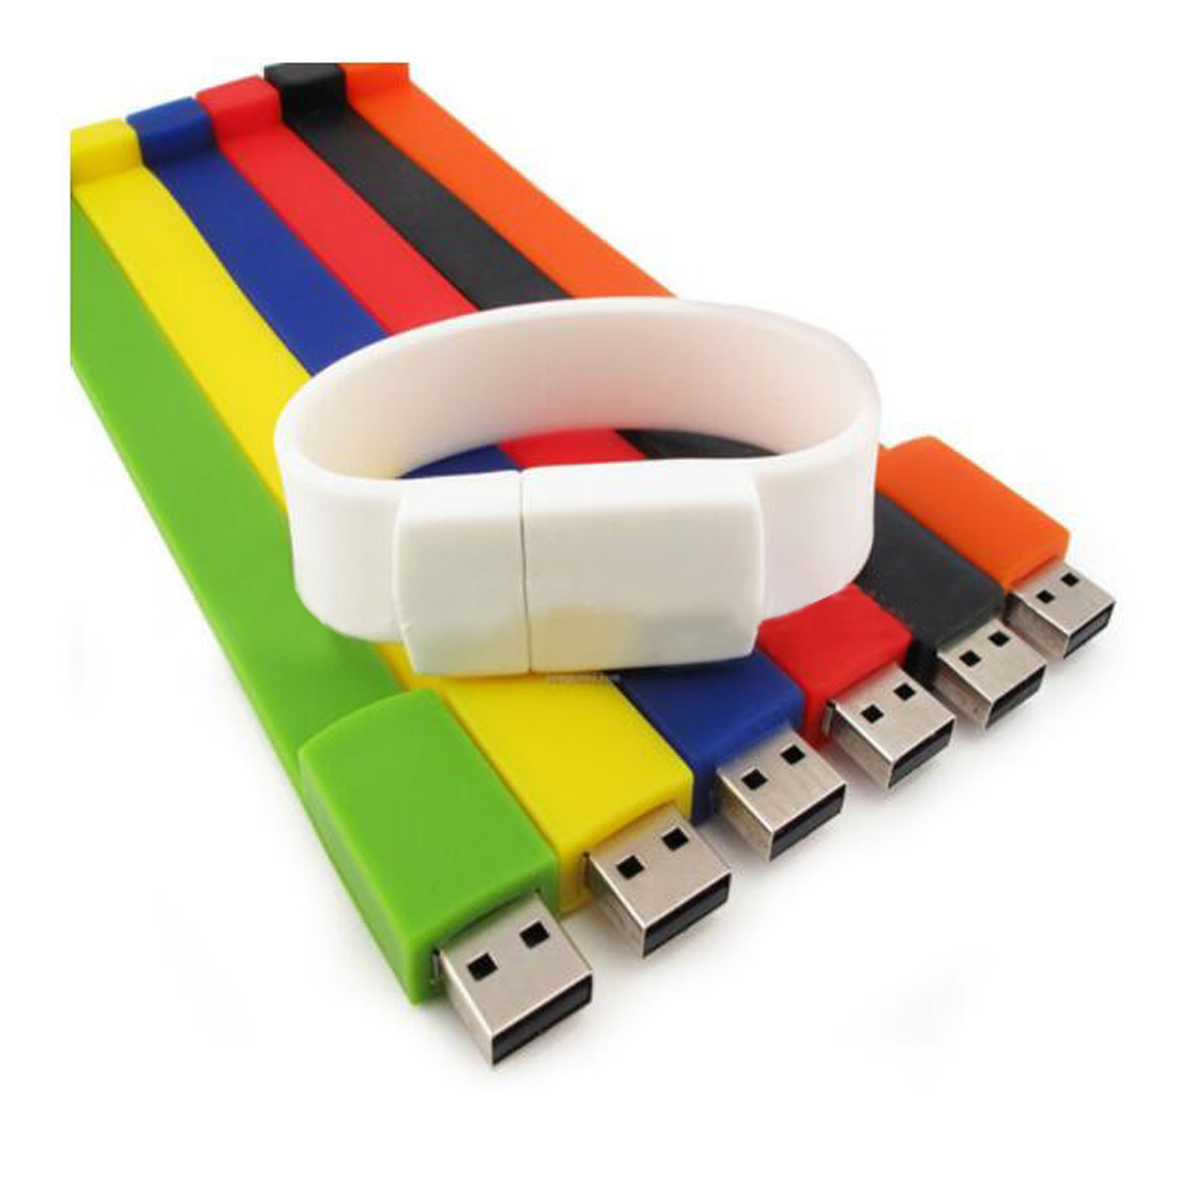 GL-ELY1110 Silicone Bracelet with 8GB